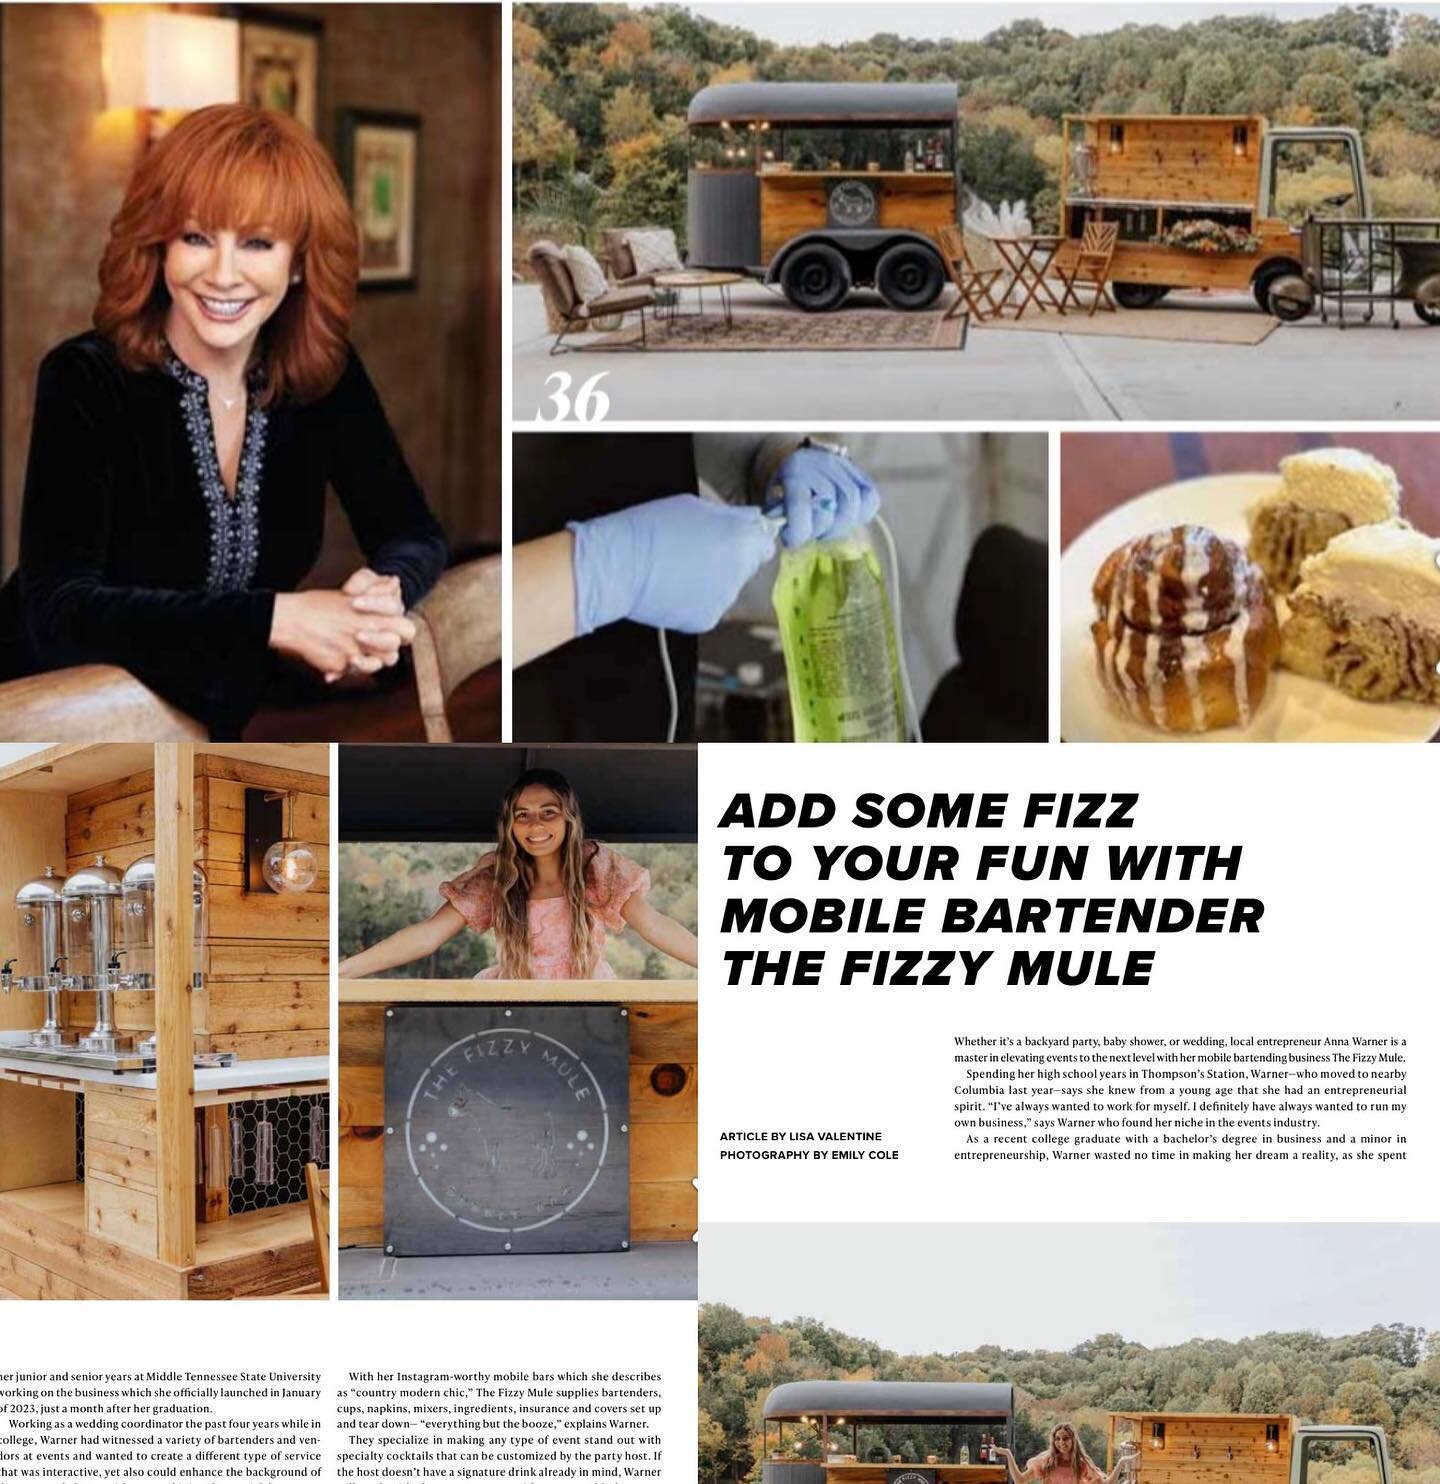 We are honored to be featured in the October issue of Thompson&rsquo;s Station Lifestyle Magazine! 
Thank you Lisa Valentine for this wonderfully written piece. We are incredibly proud to be a part of the Thompson&rsquo;s Station, Franklin, Columbia,